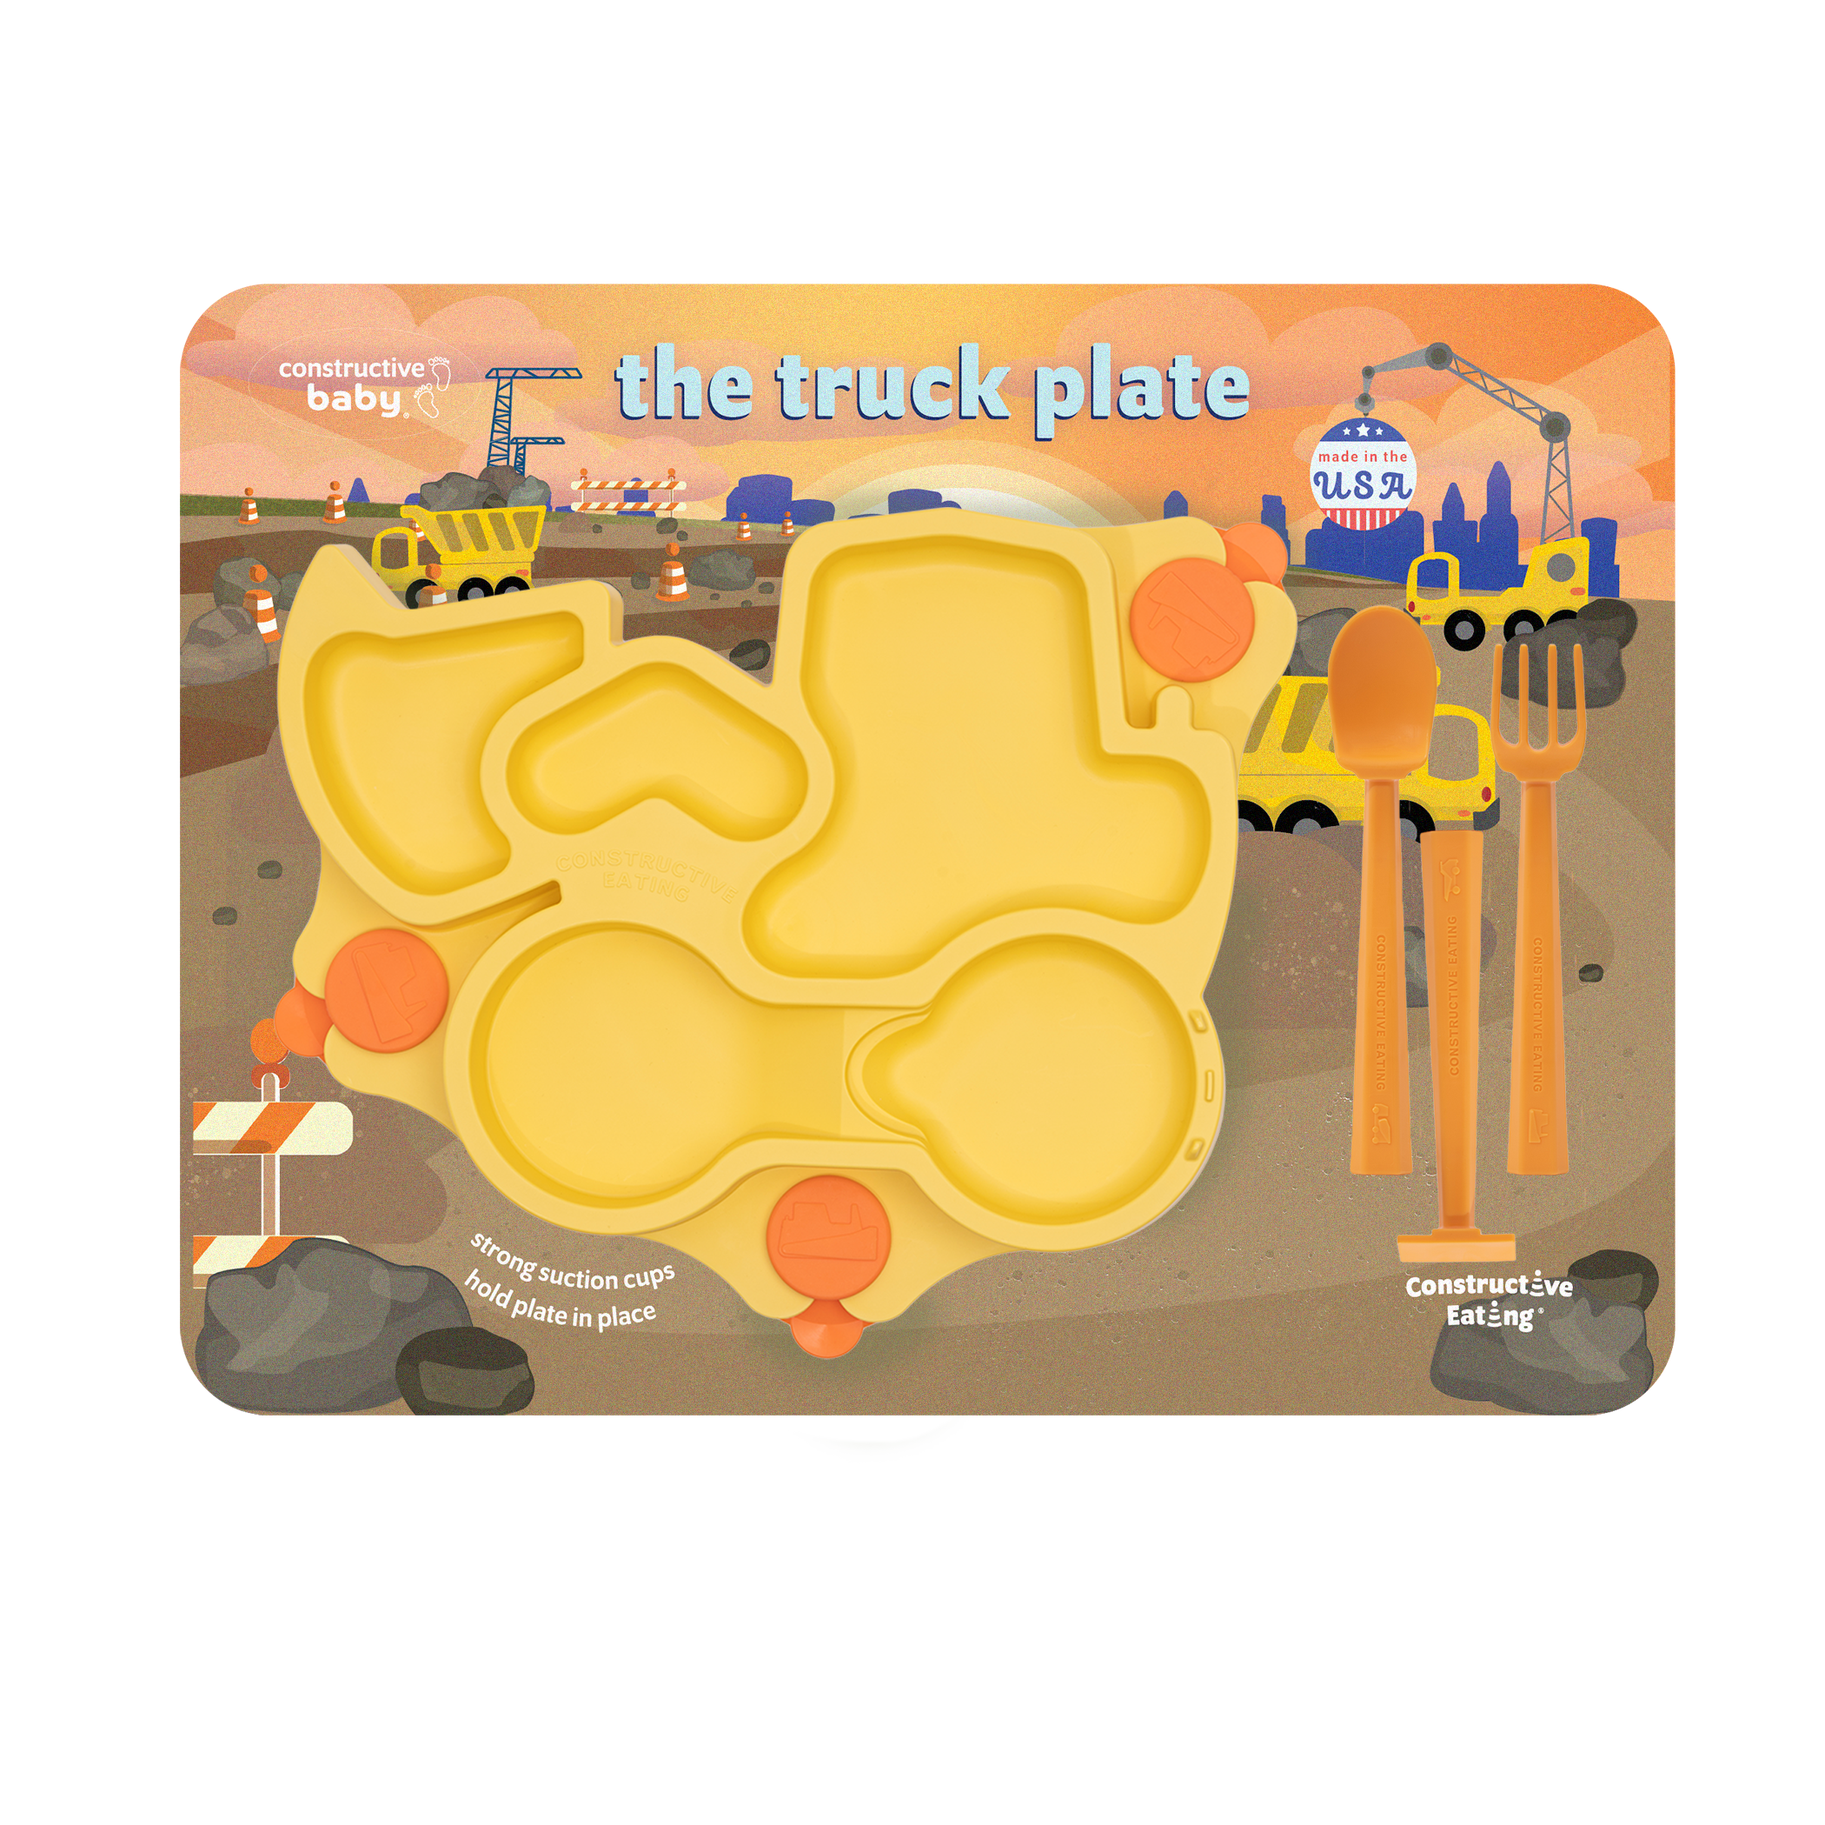 Constructive Eating Baby Truck Plate